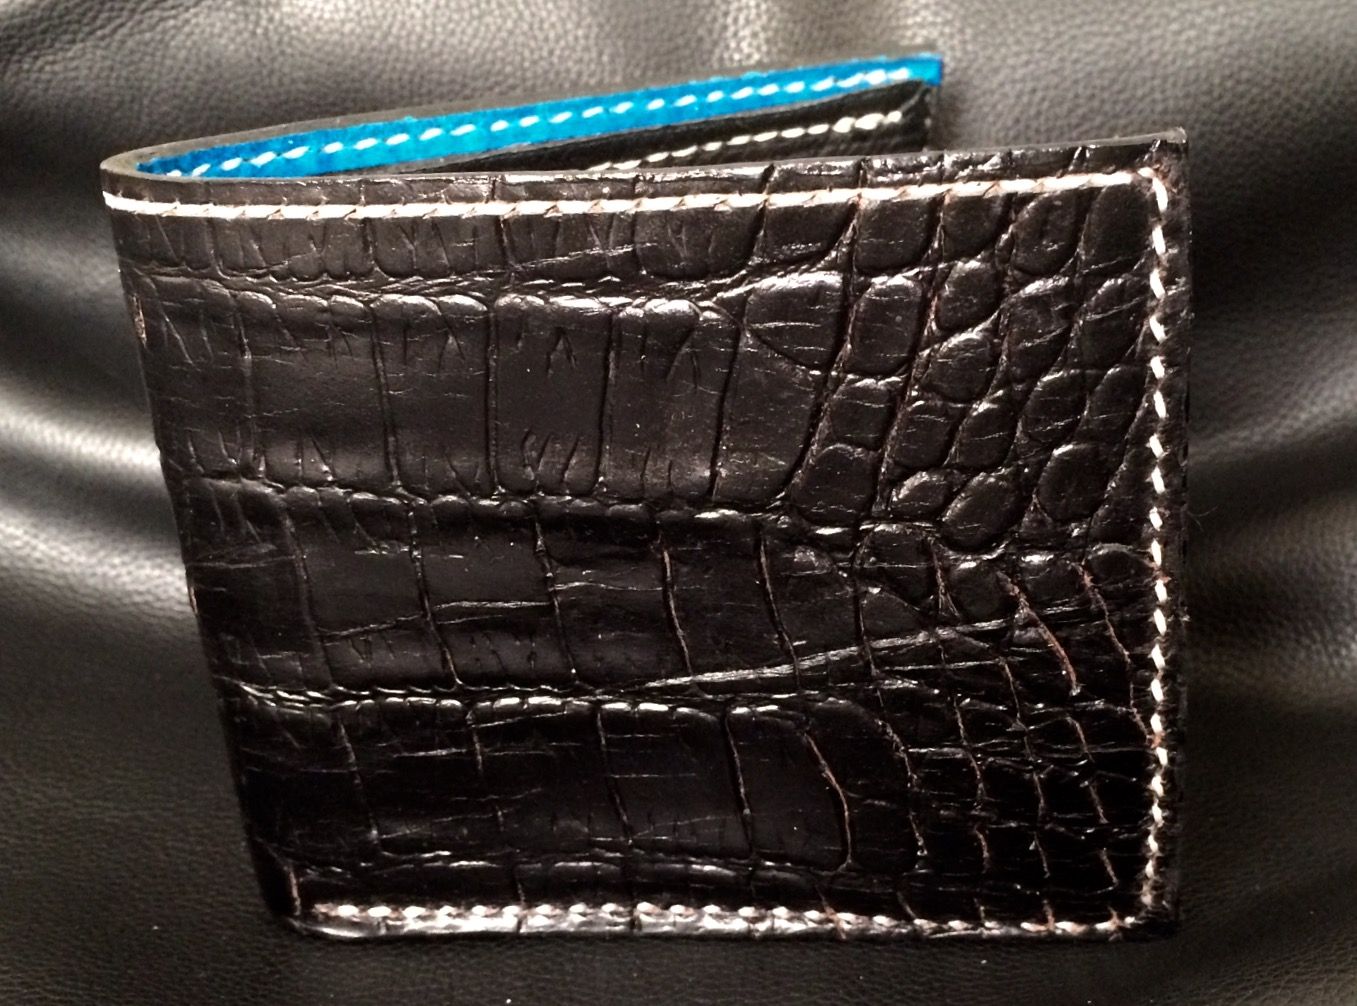 Custom hand sewn leather wallet bifold hand painted in bold colors